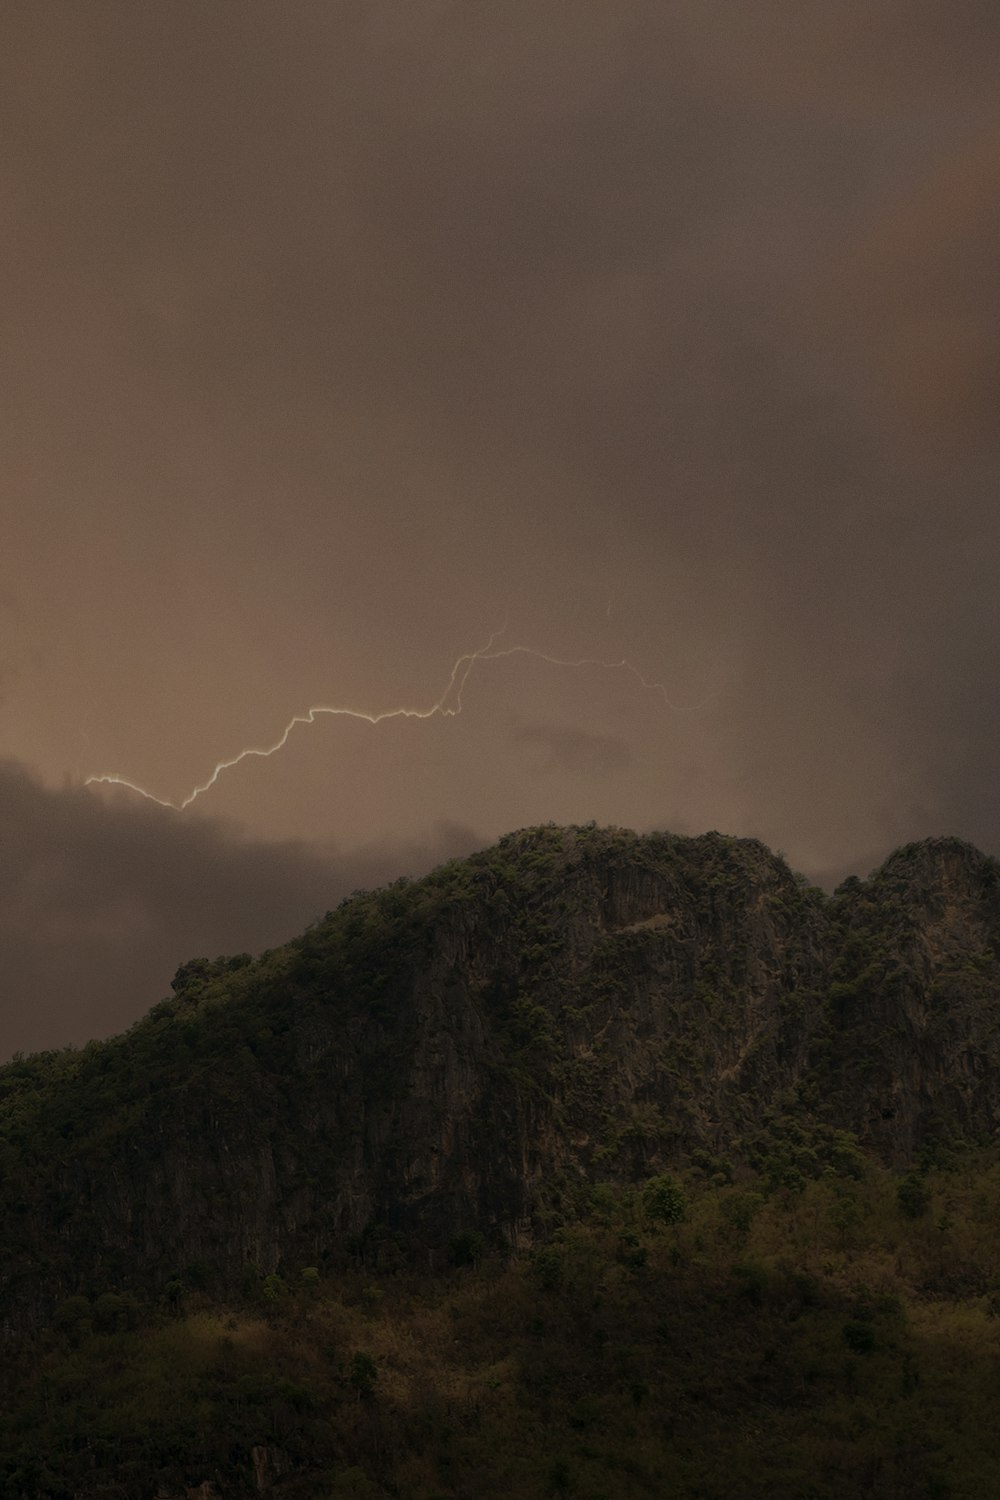 a large mountain with a lightning bolt in the sky